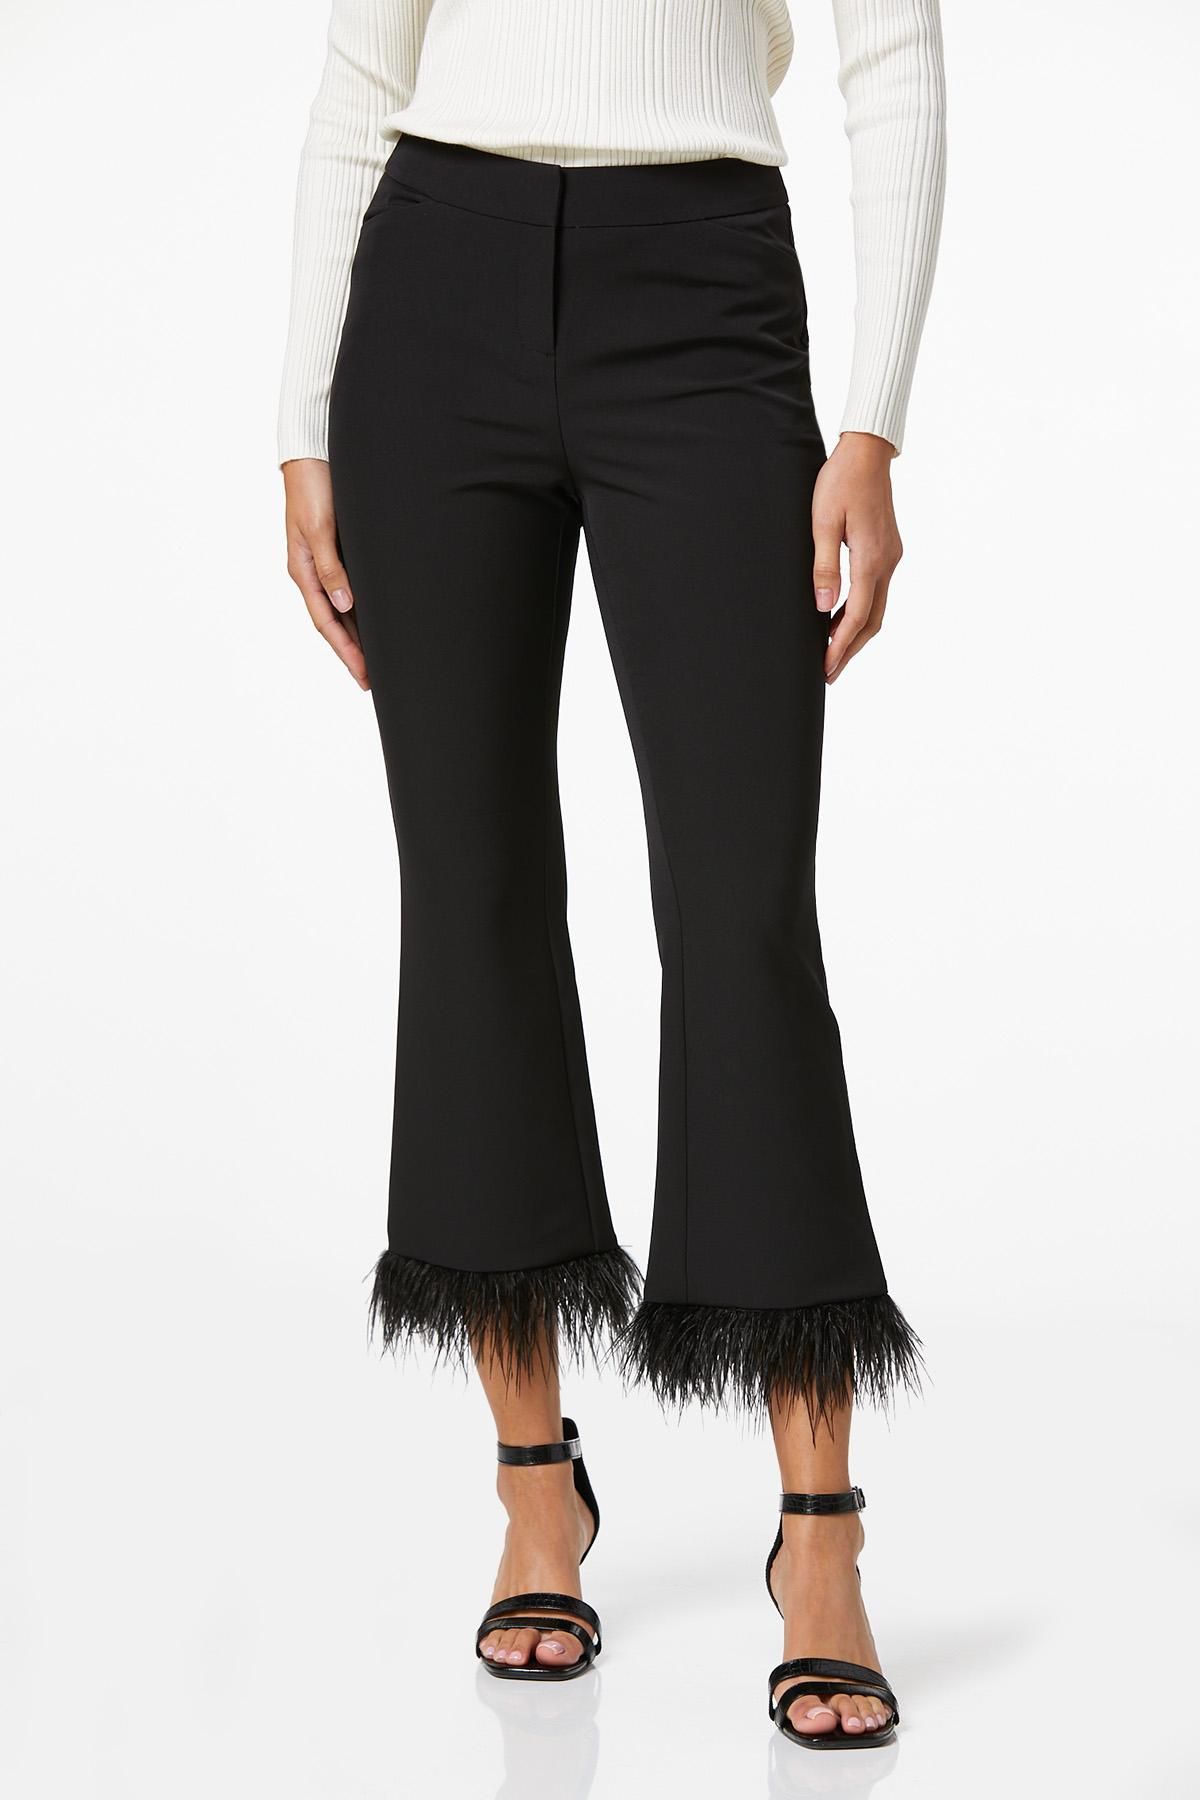 Feather Trim Pants | Cato Fashions